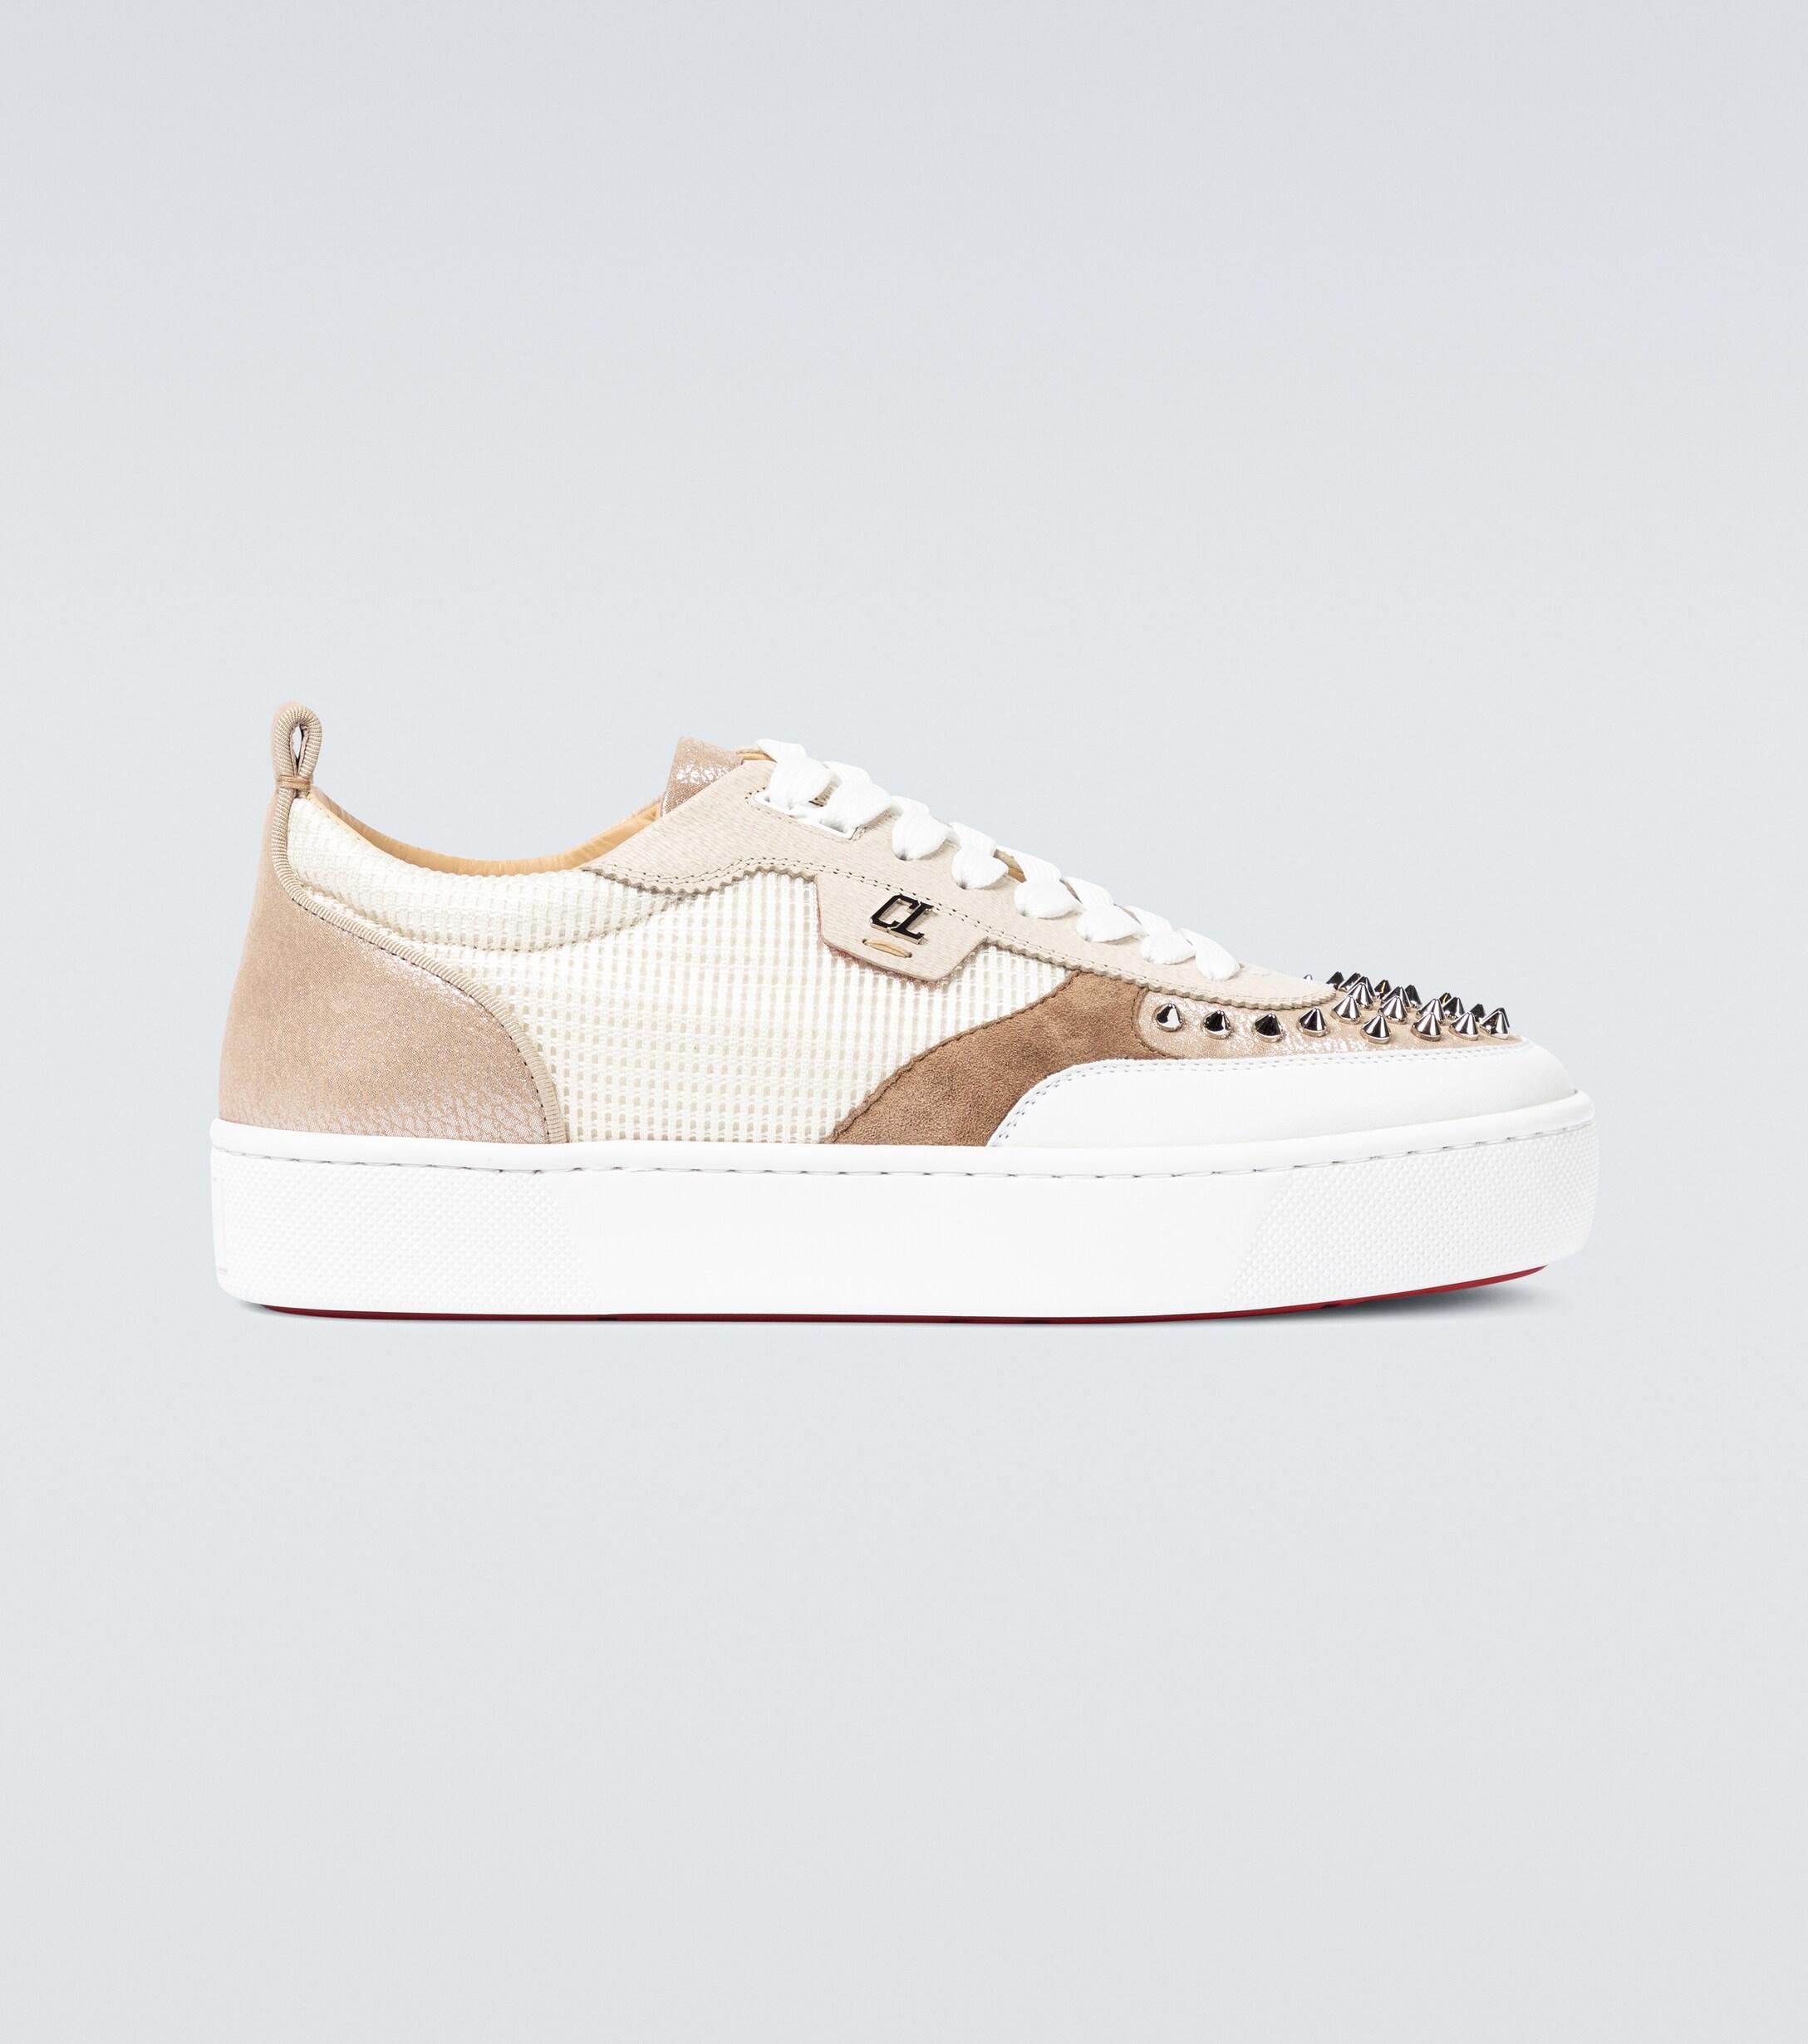 Christian Louboutin Leather Happyrui Spikes Sneakers for Men - Lyst